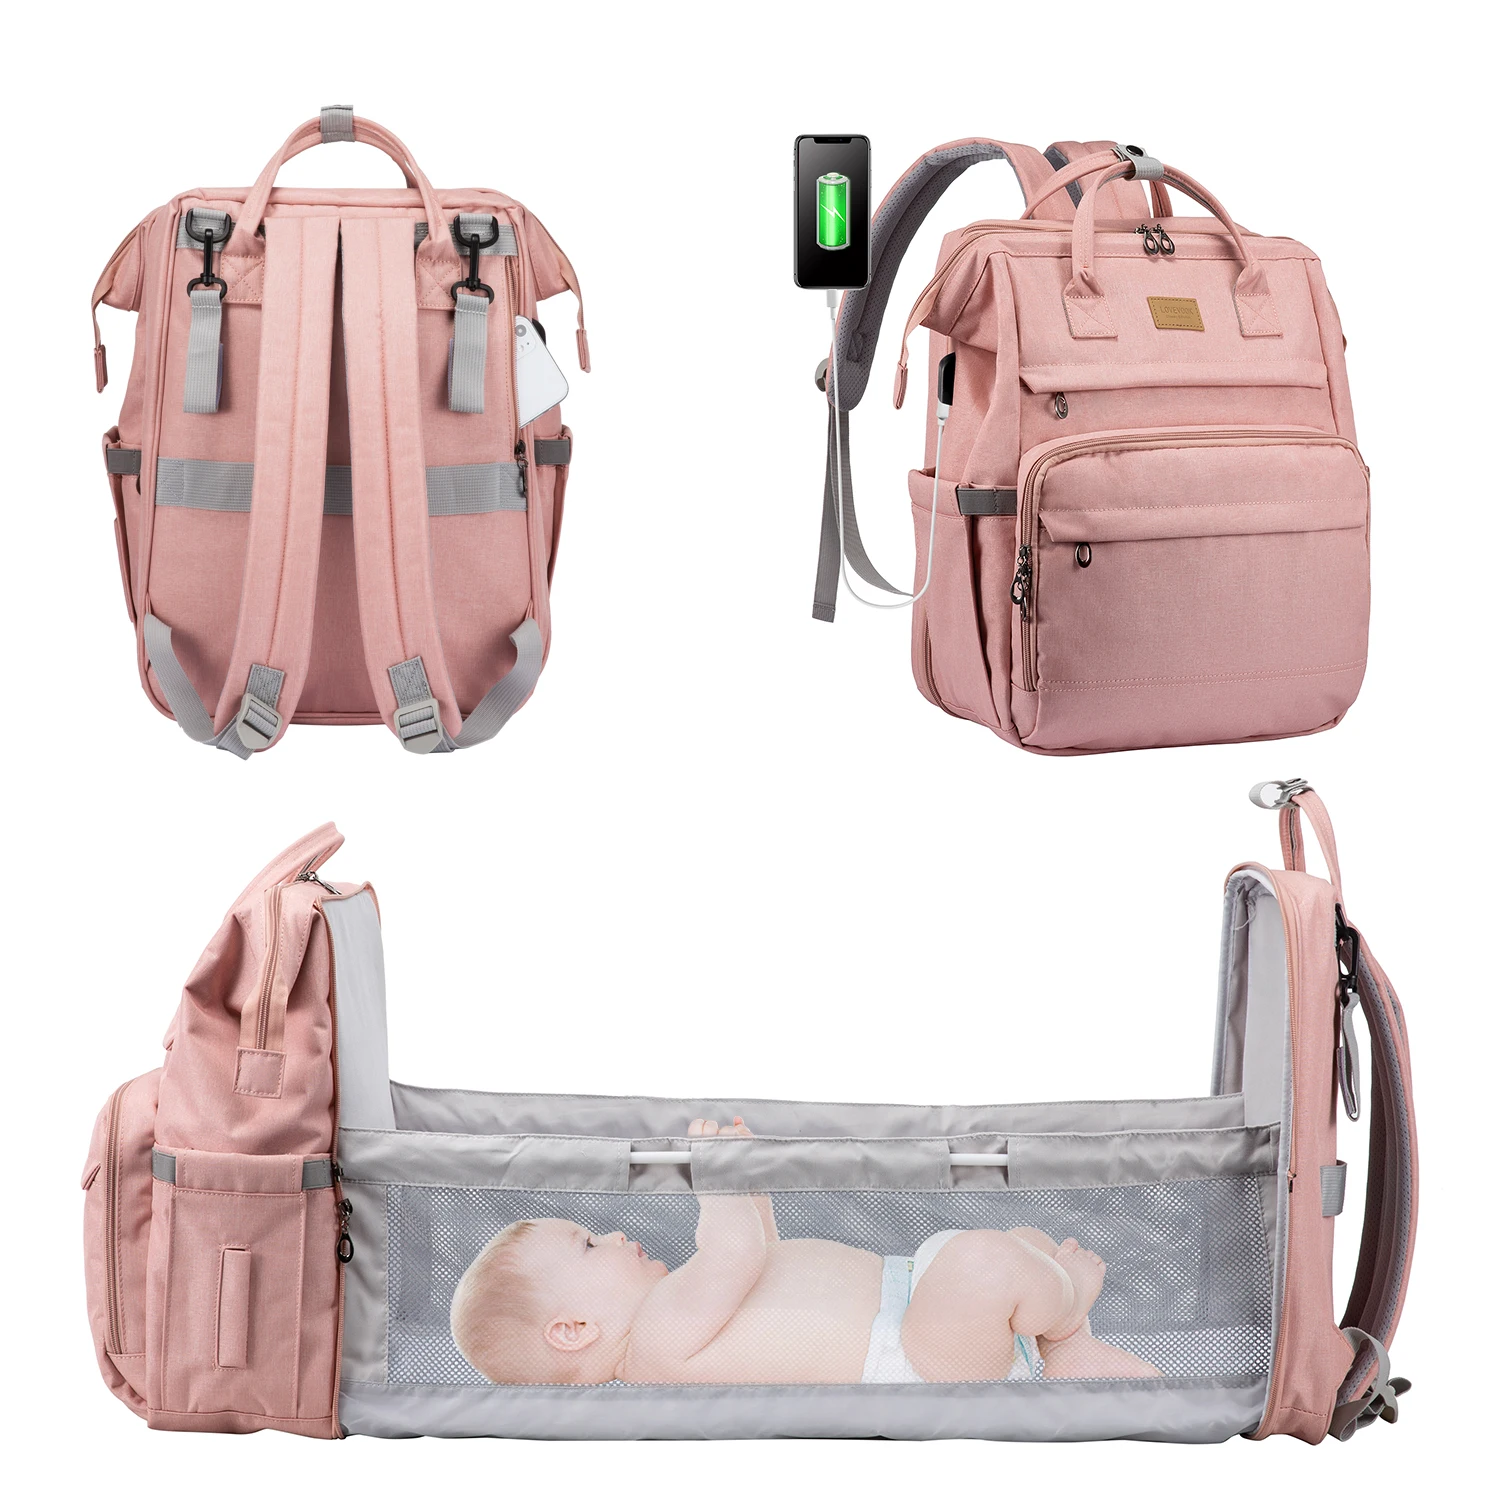 

LOVEVOOK promotion High Quality Diaper Bag Portable nappy wet bag waterproof mommy backpacks bed diaper bags, Customized colors